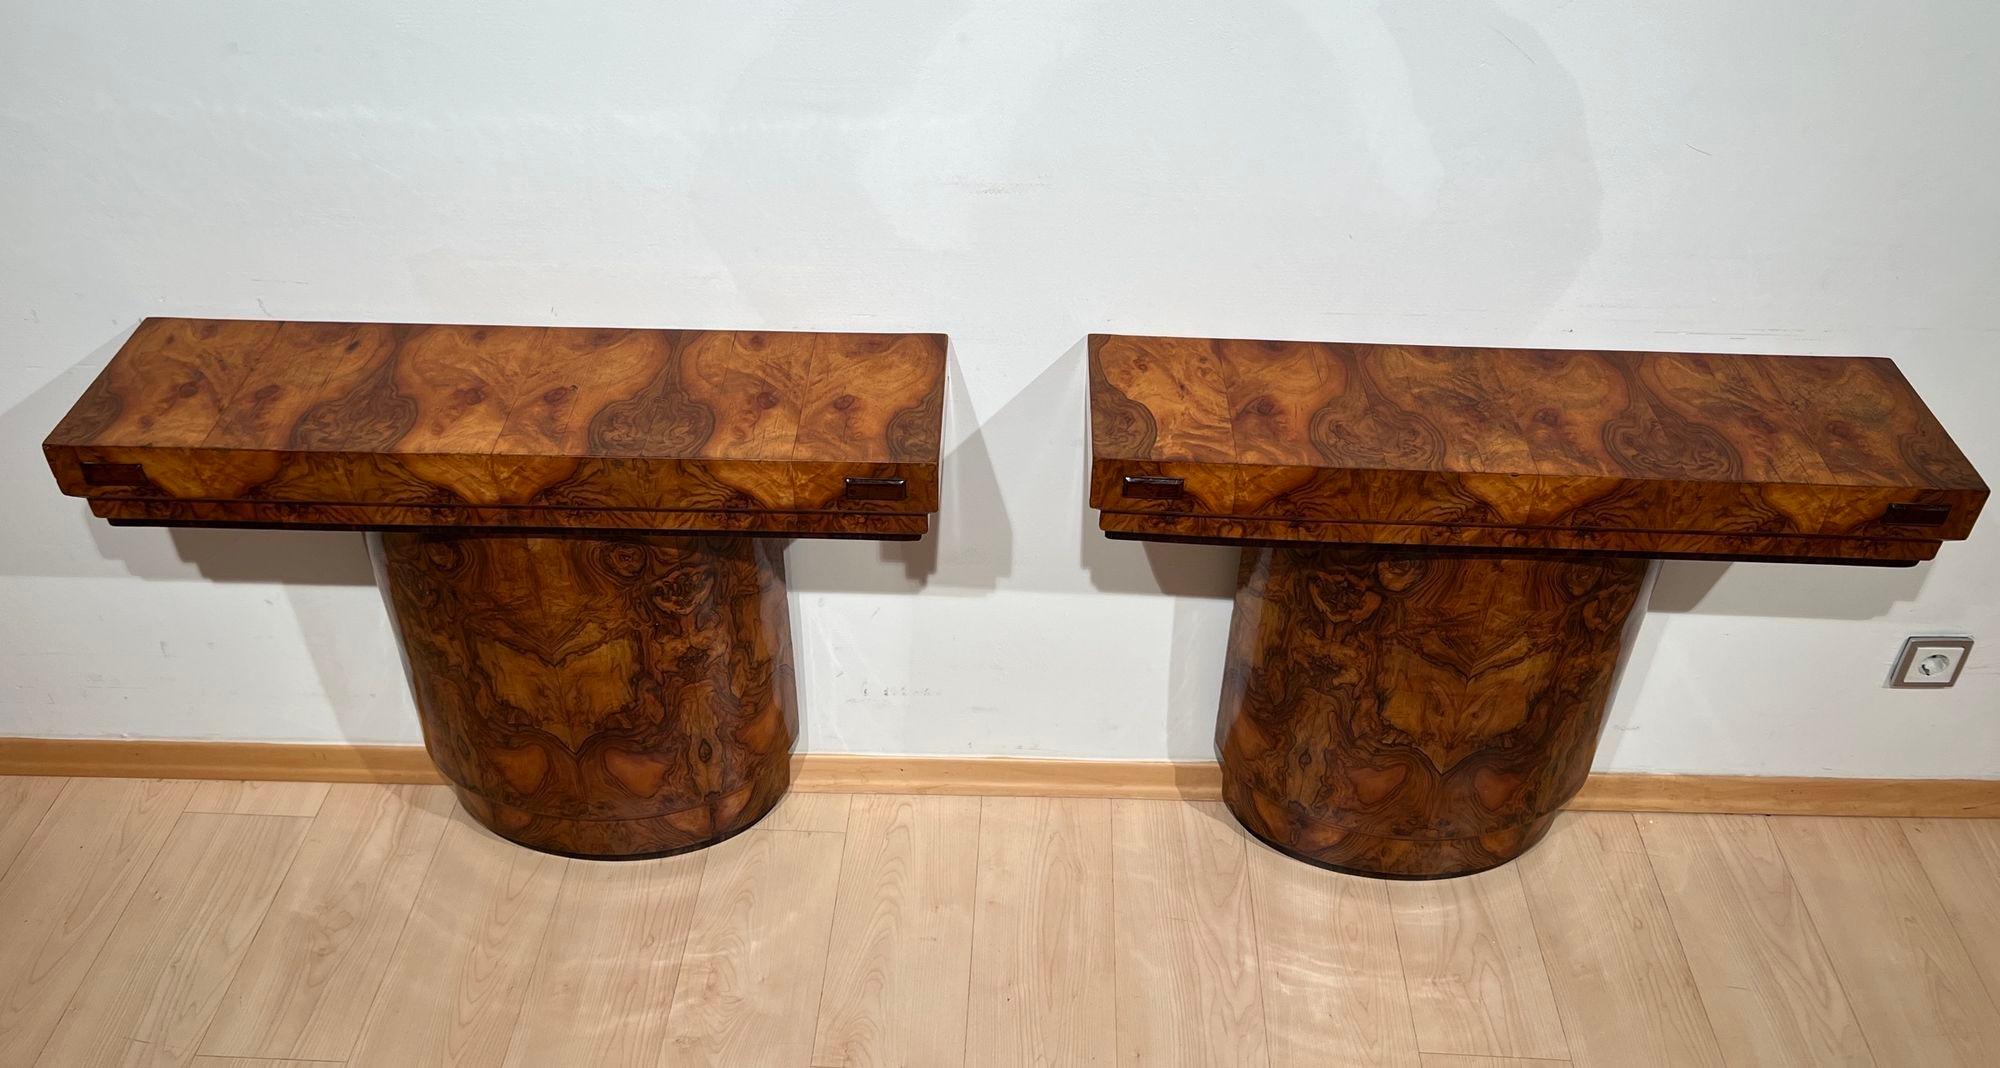 Fine Pair of original Art Deco console tables from France around 1930.
Very beautiful book-matched walnut veneer on convex front and low depth of the shelf.
Polished to a high gloss polished surface.
Veneered in Macassar underneath the top and base.